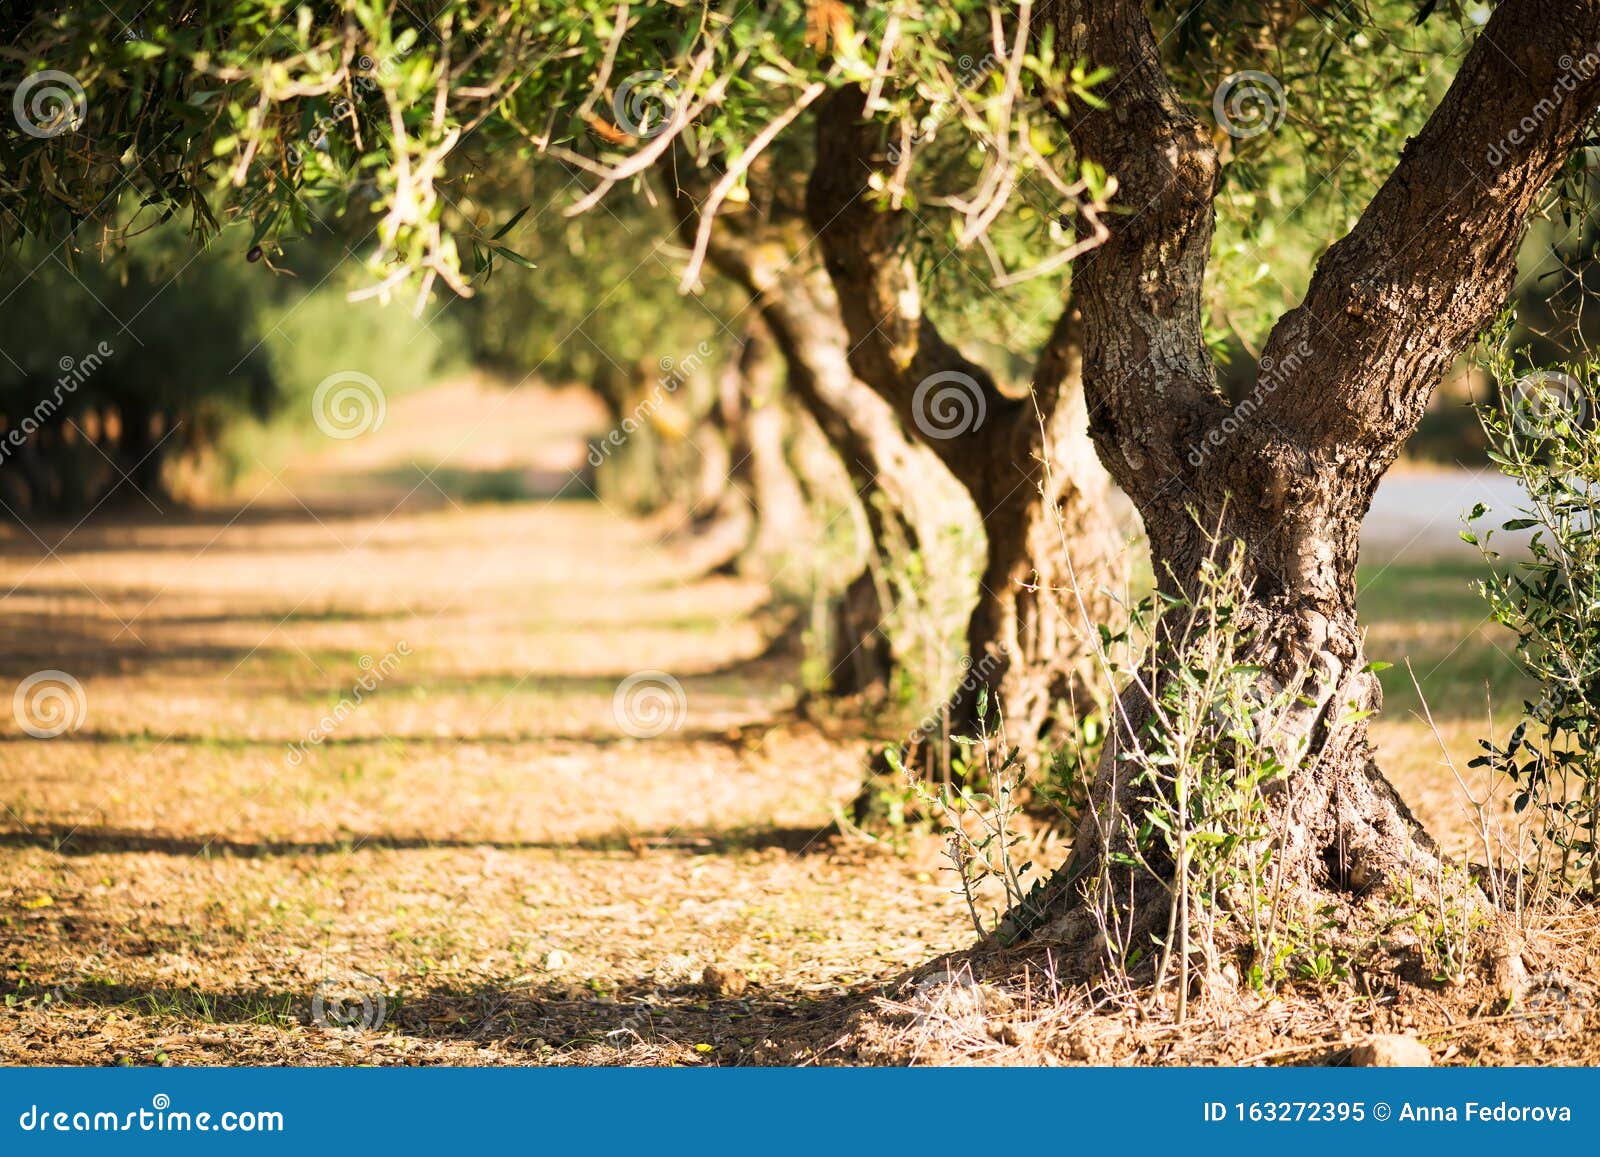 olive trees background on blurred background. olive trees on a grove in salento, puglia, italy. traditional plantation of olive